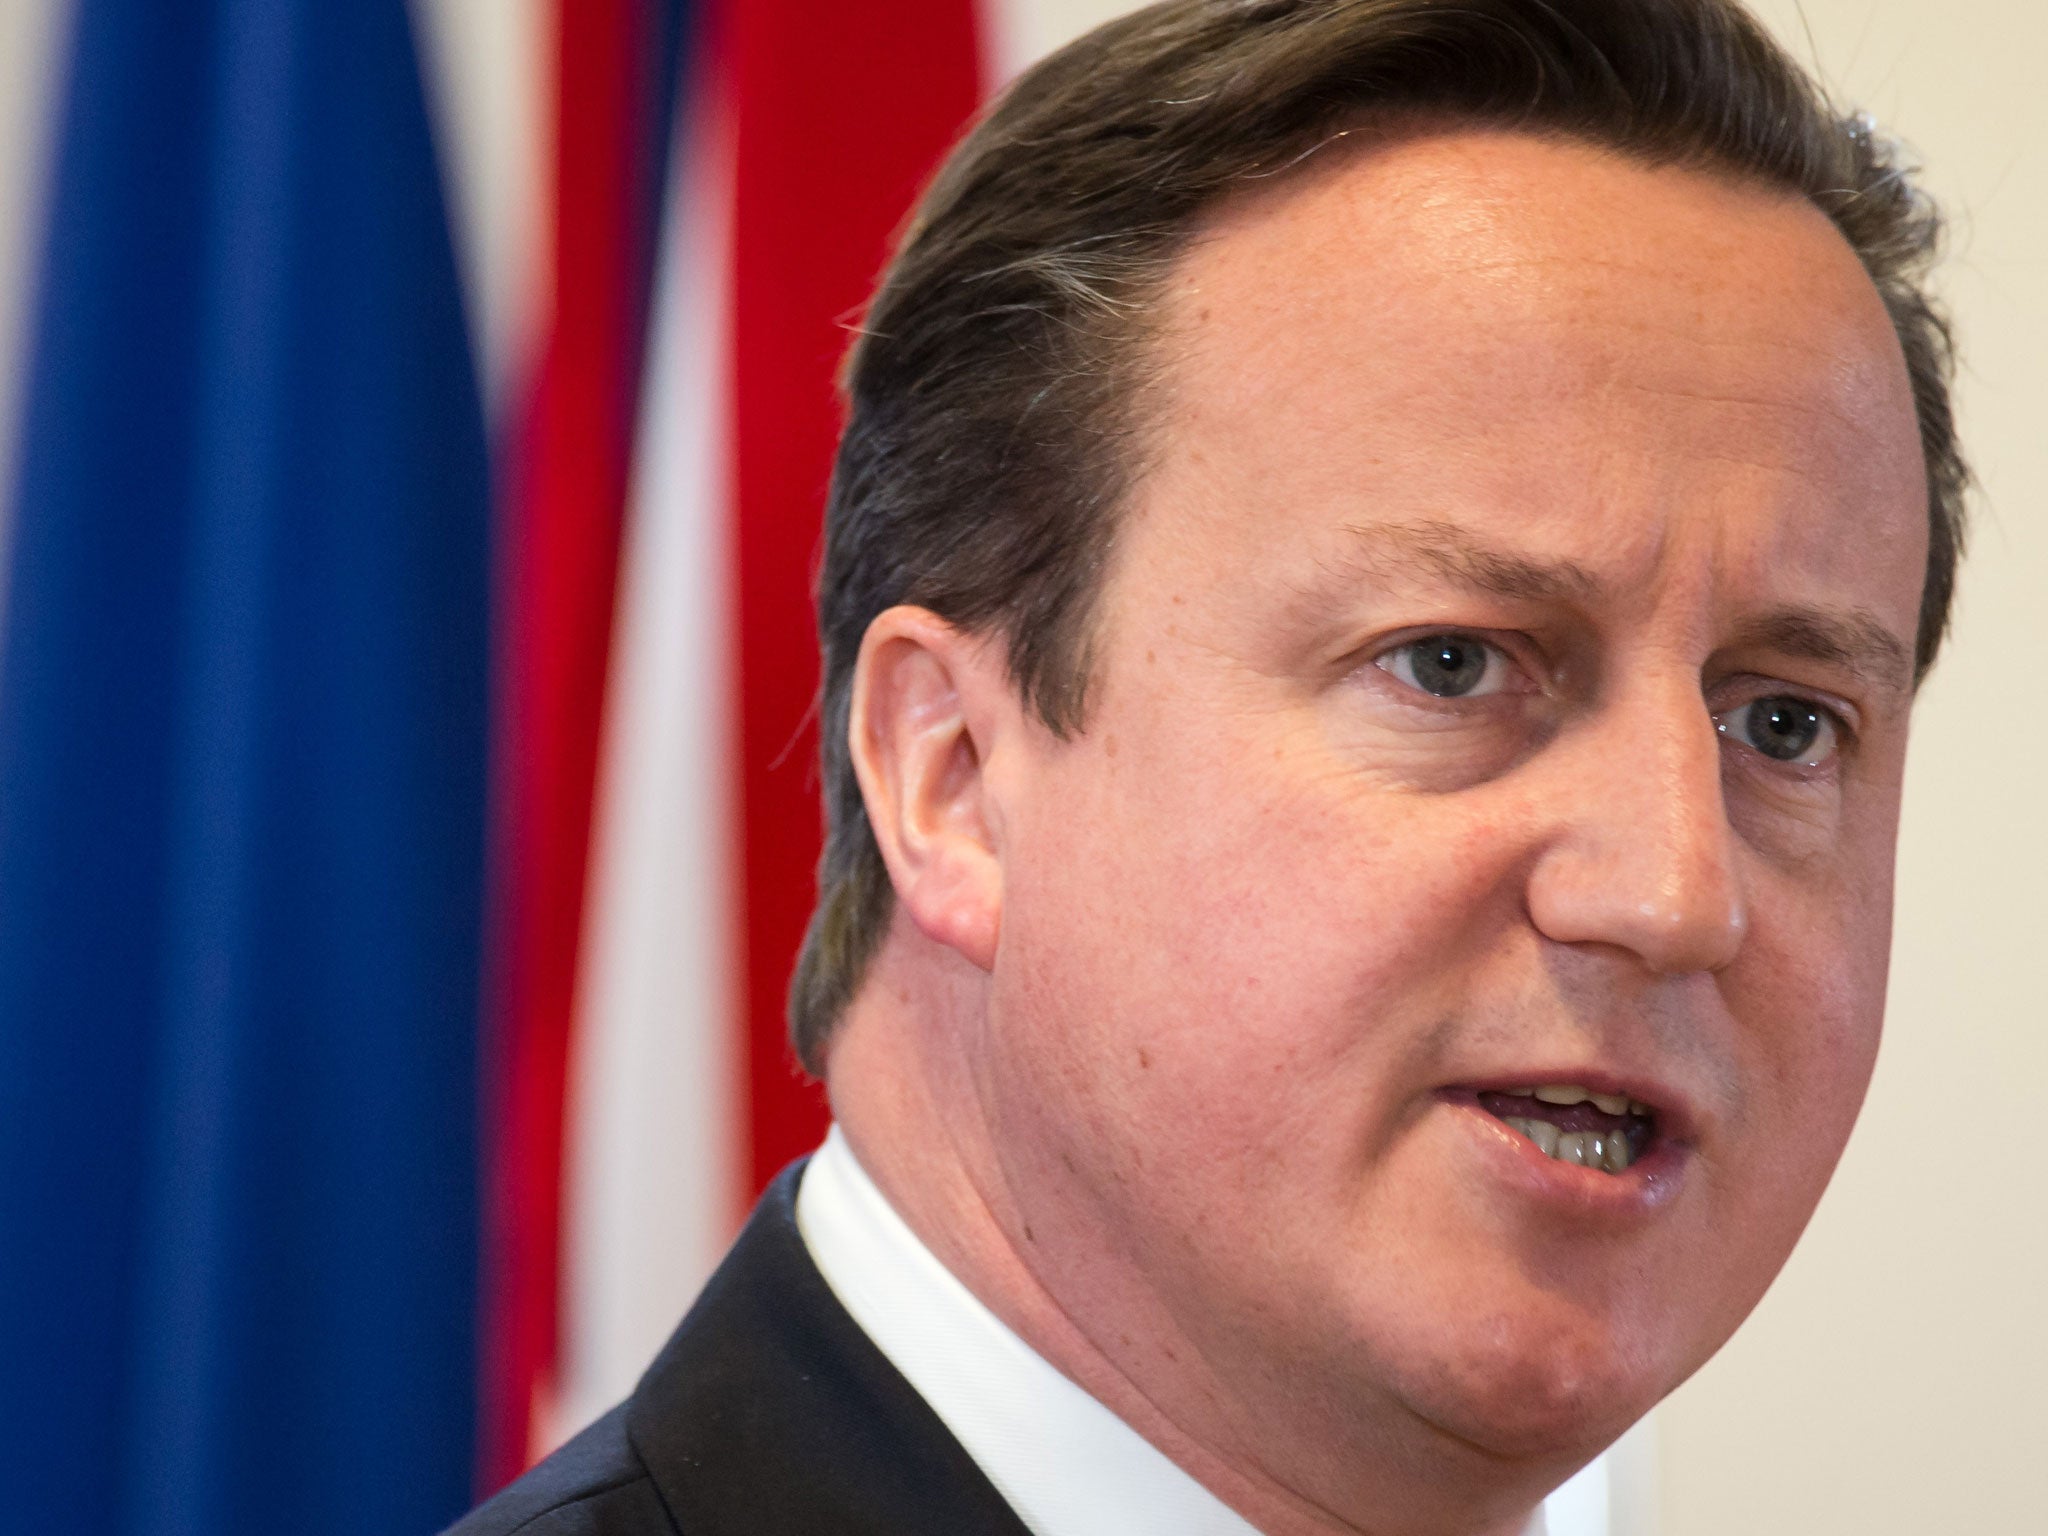 David Cameron's absence is not a remark on Russia's stance on gay rights, according to Downing Street